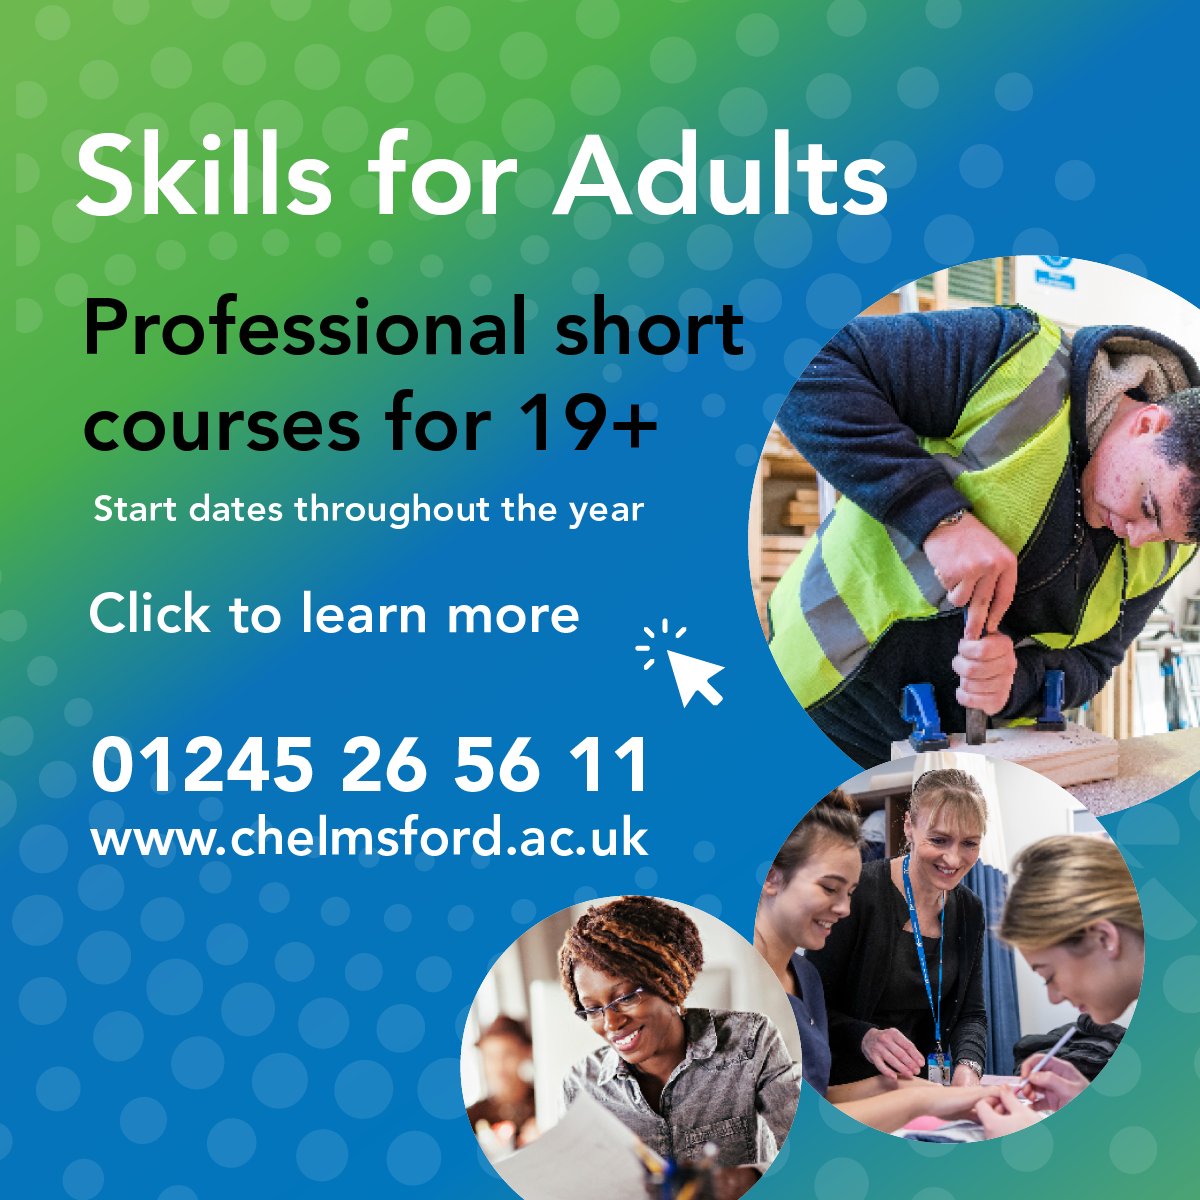 Did you know that as well as our 16+ courses, we offer a range of new courses exclusively for 19+ in various subject areas? Explore here: chelmsford.ac.uk/courses/adult-… #chelmsford #adultcourses #learning #adultlearning #upskill #chelmsfordcollege